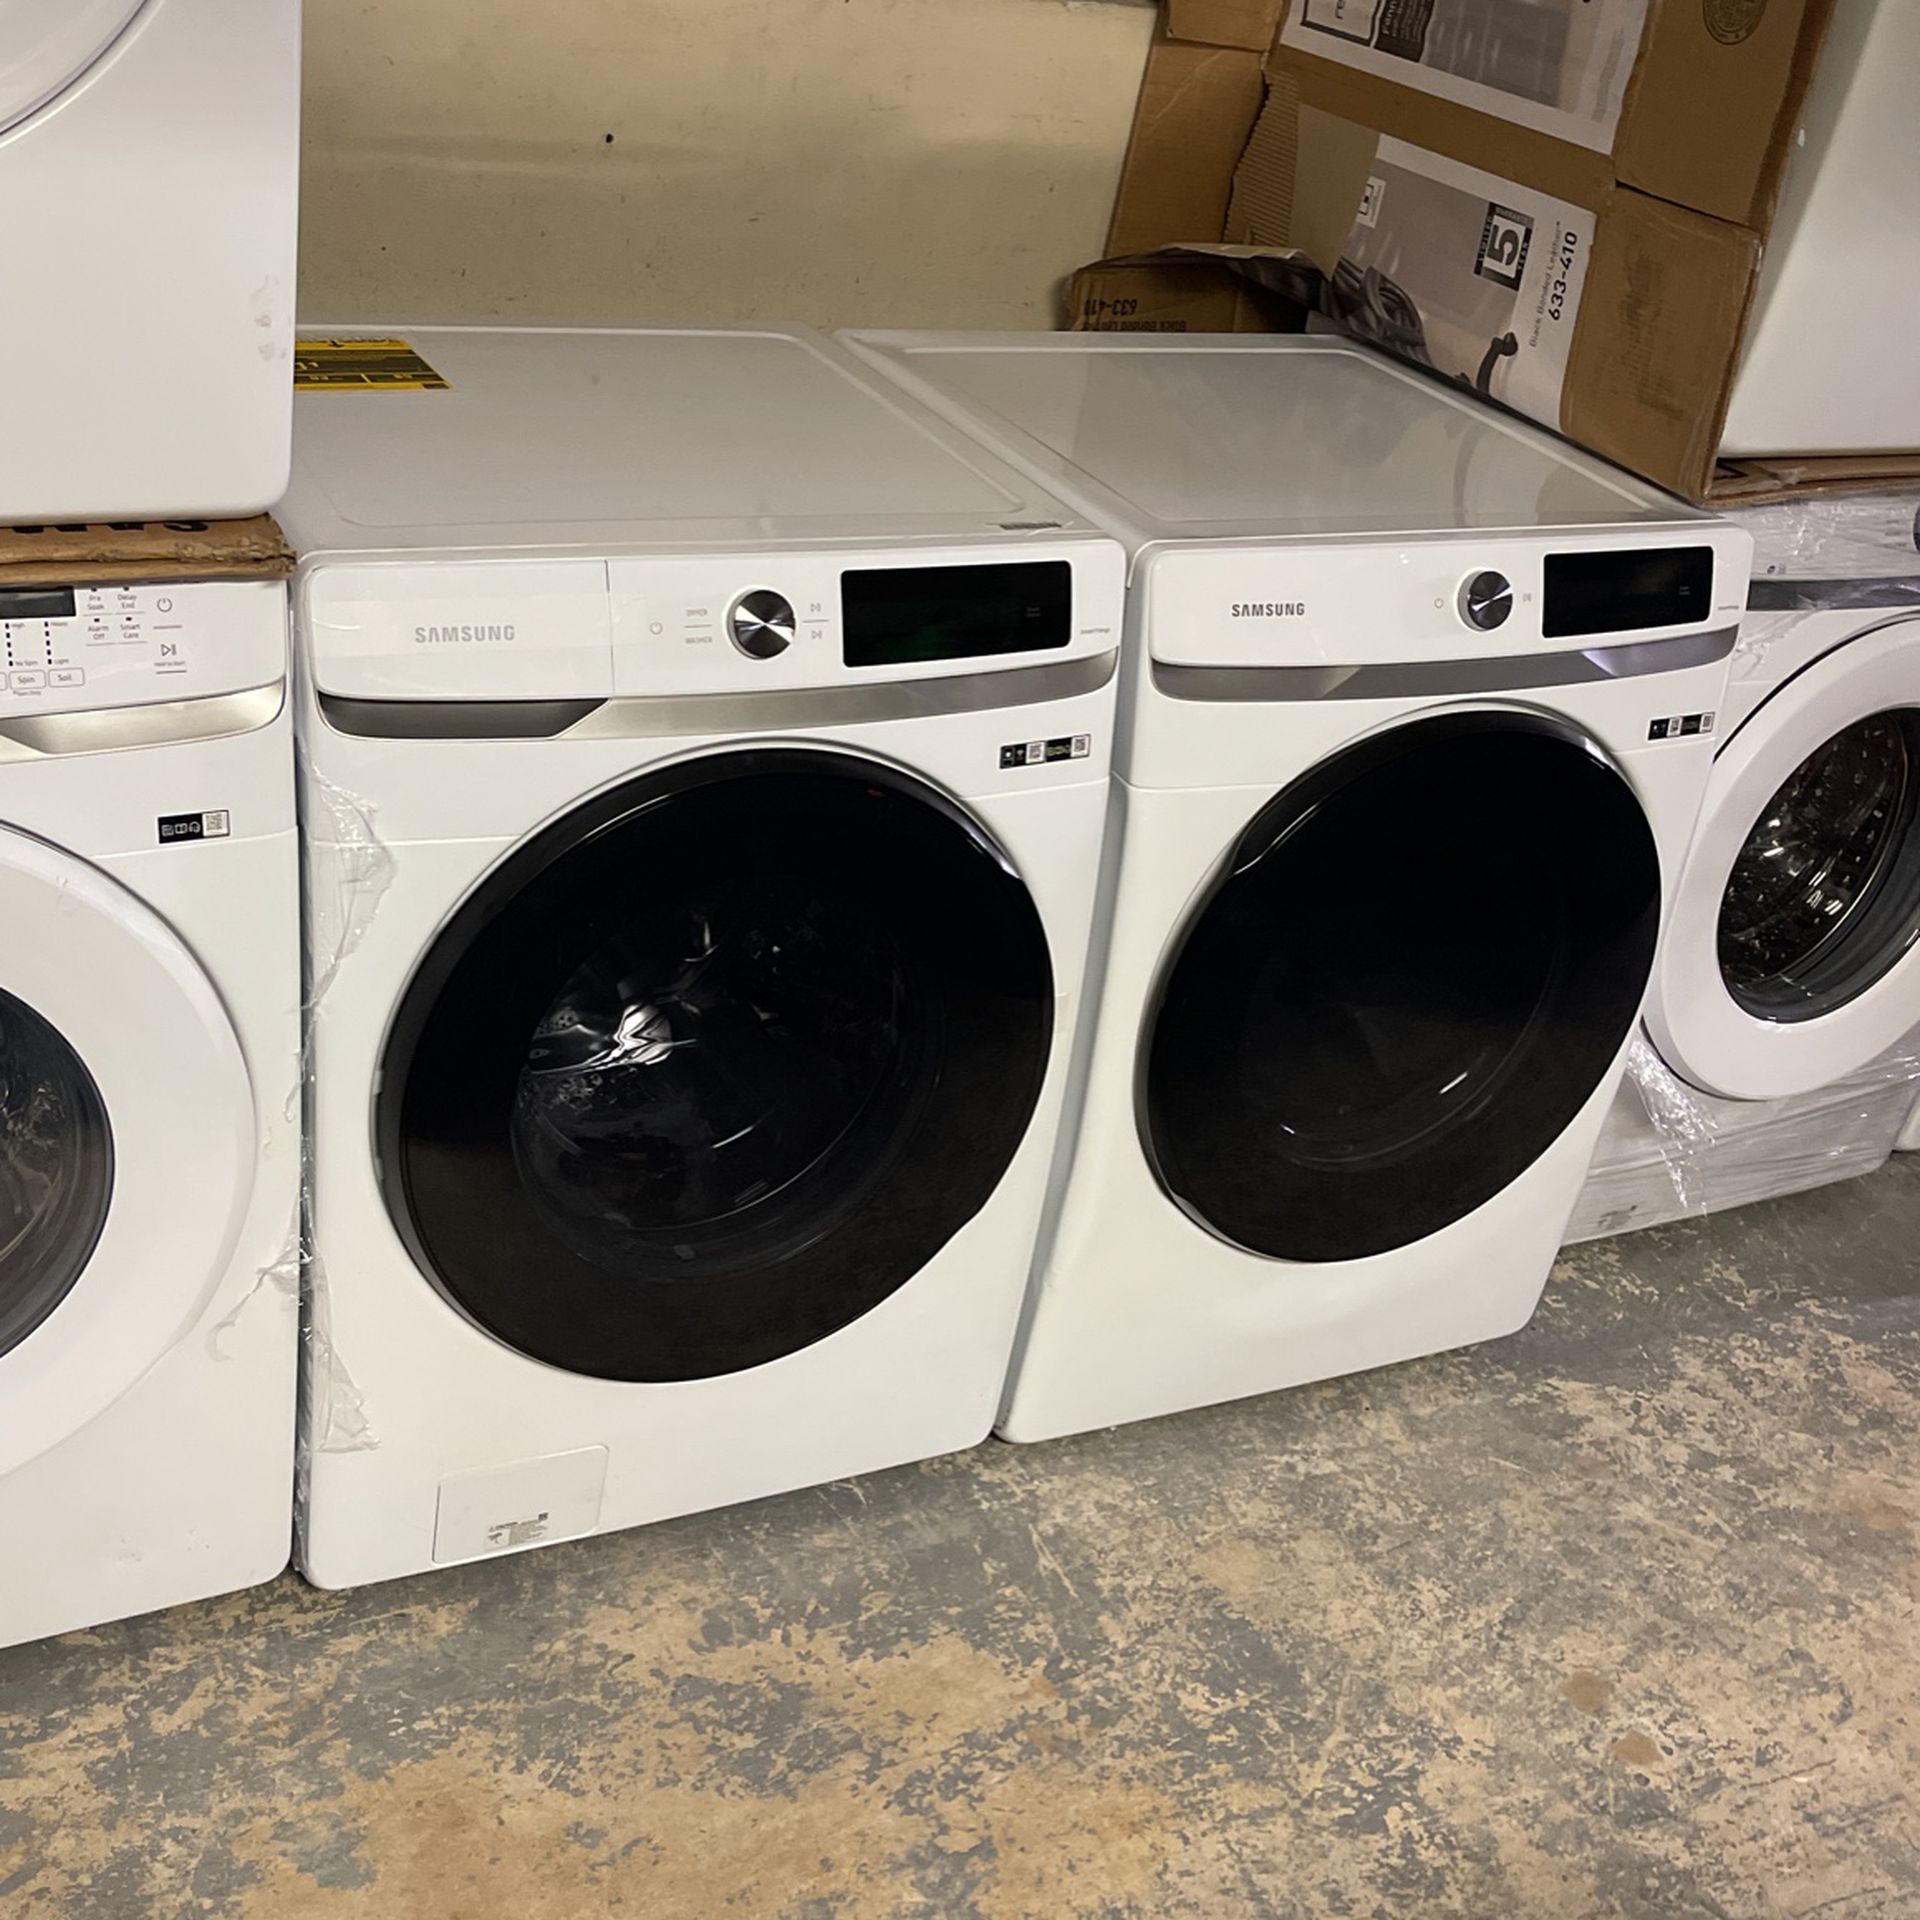 New Open Box Samsung Washer And Dryer Scratch And Dents Front Loaders 27”